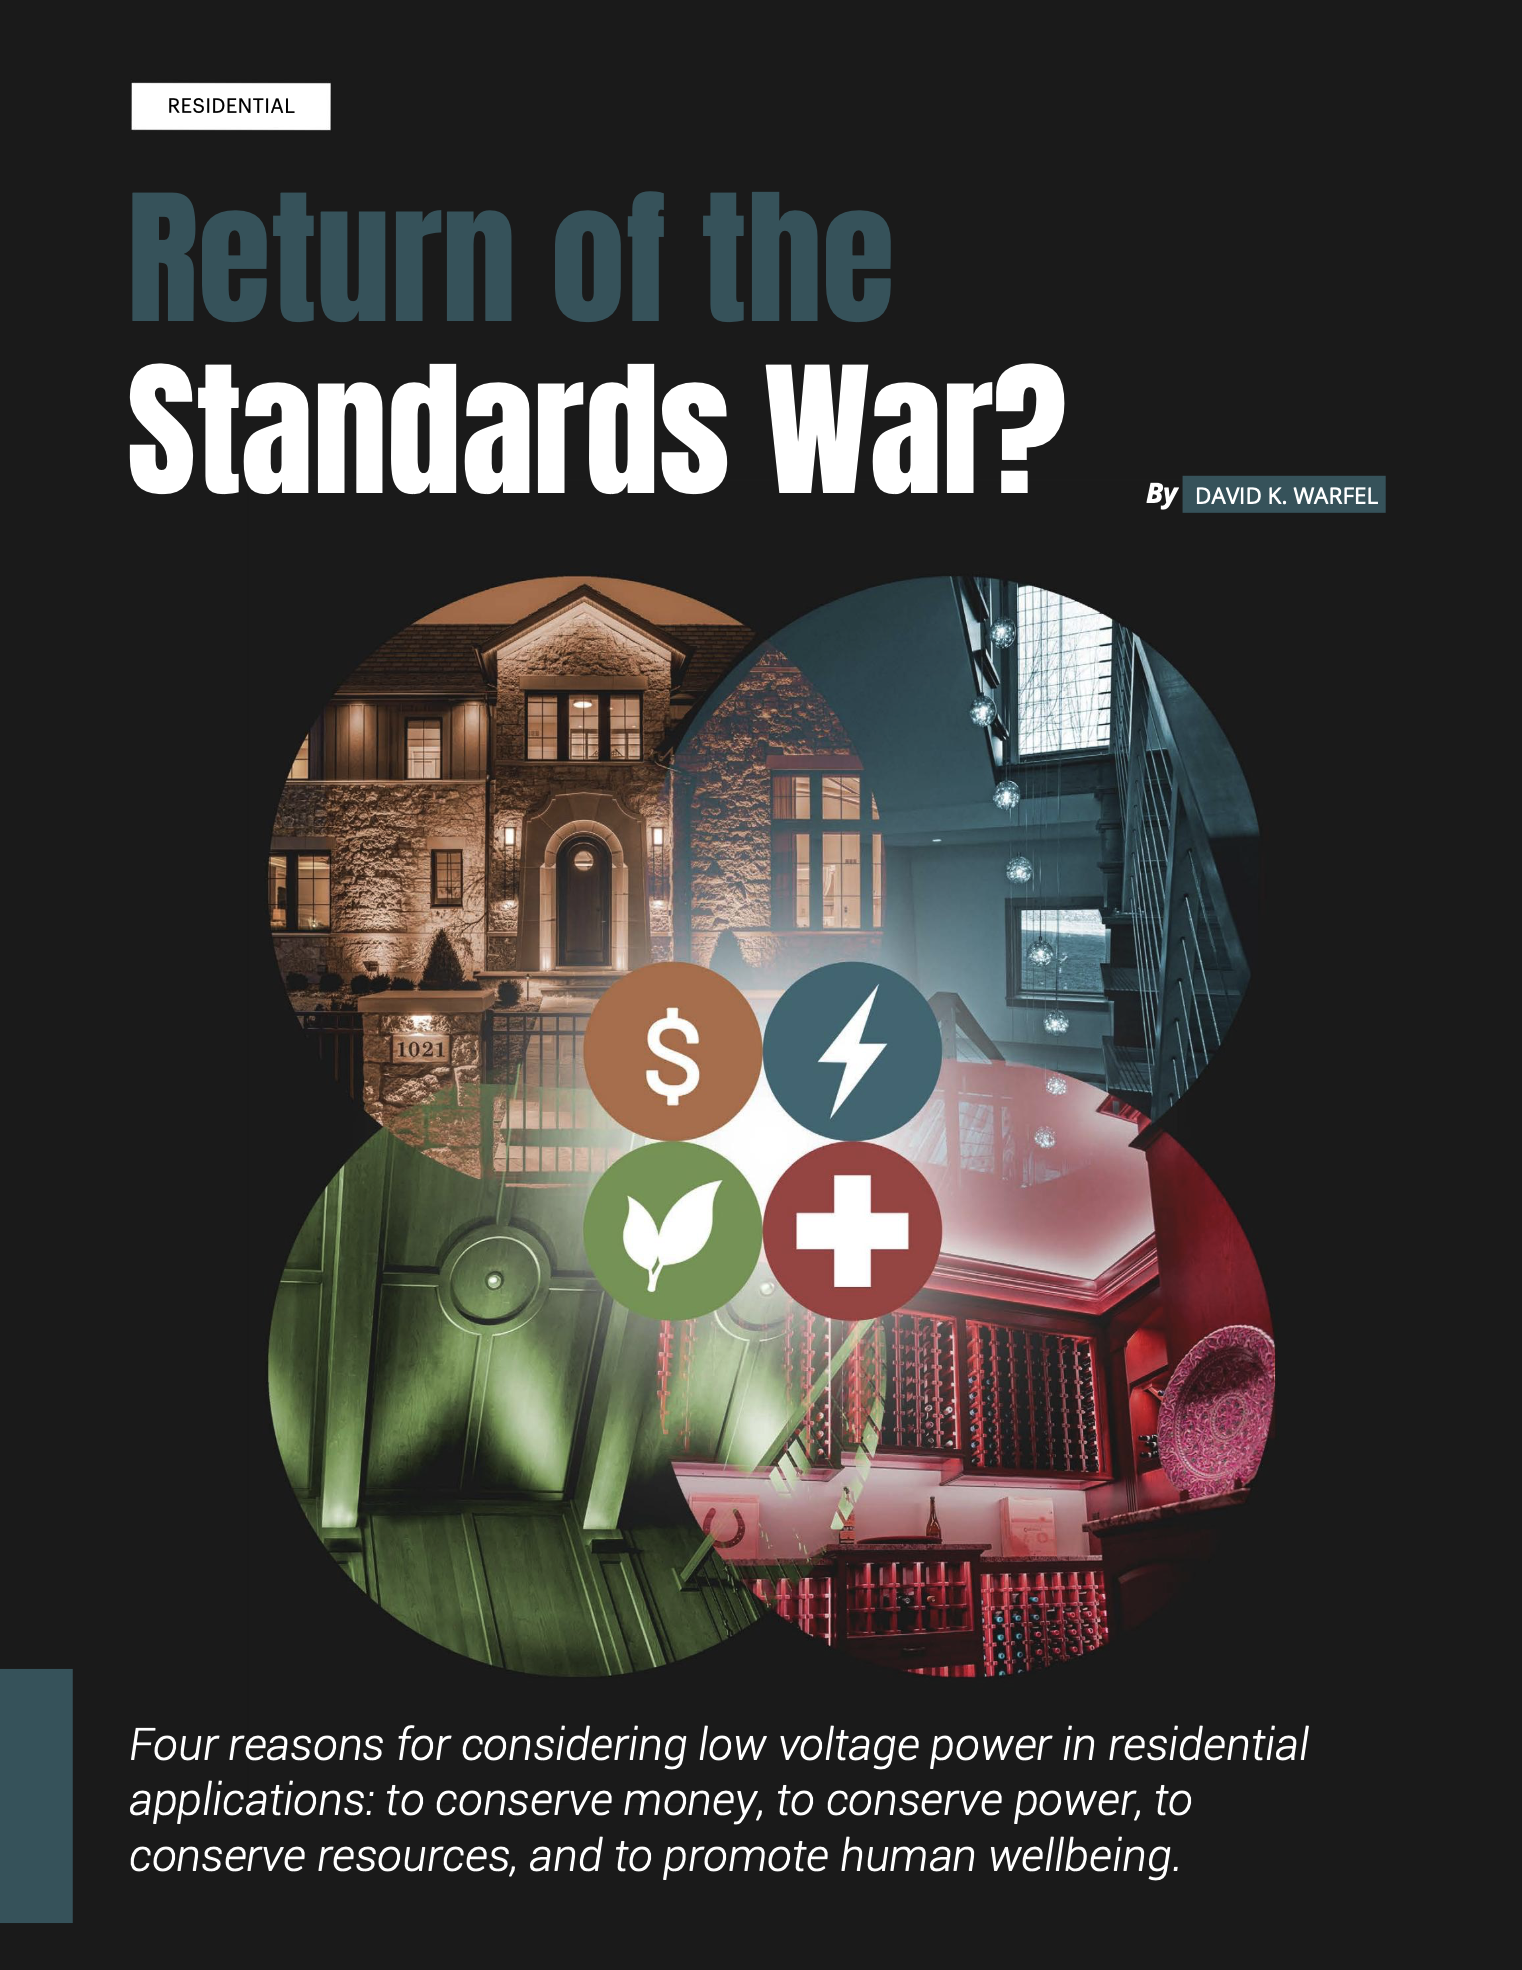 A book/article cover for Return of the Standards War? by David K. Warfel